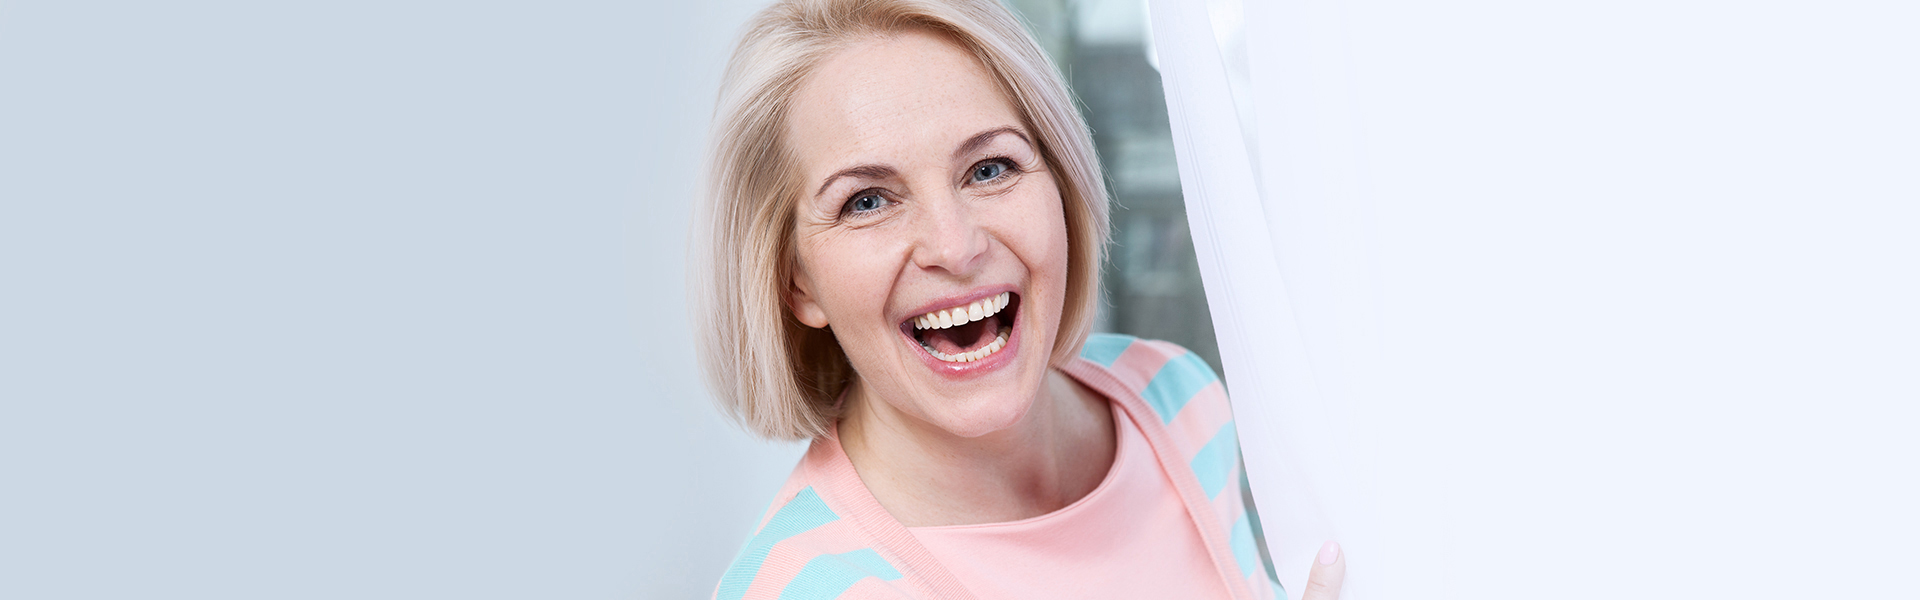 Partial & Full Dentures Appropriate Solutions for Replacing Missing Teeth